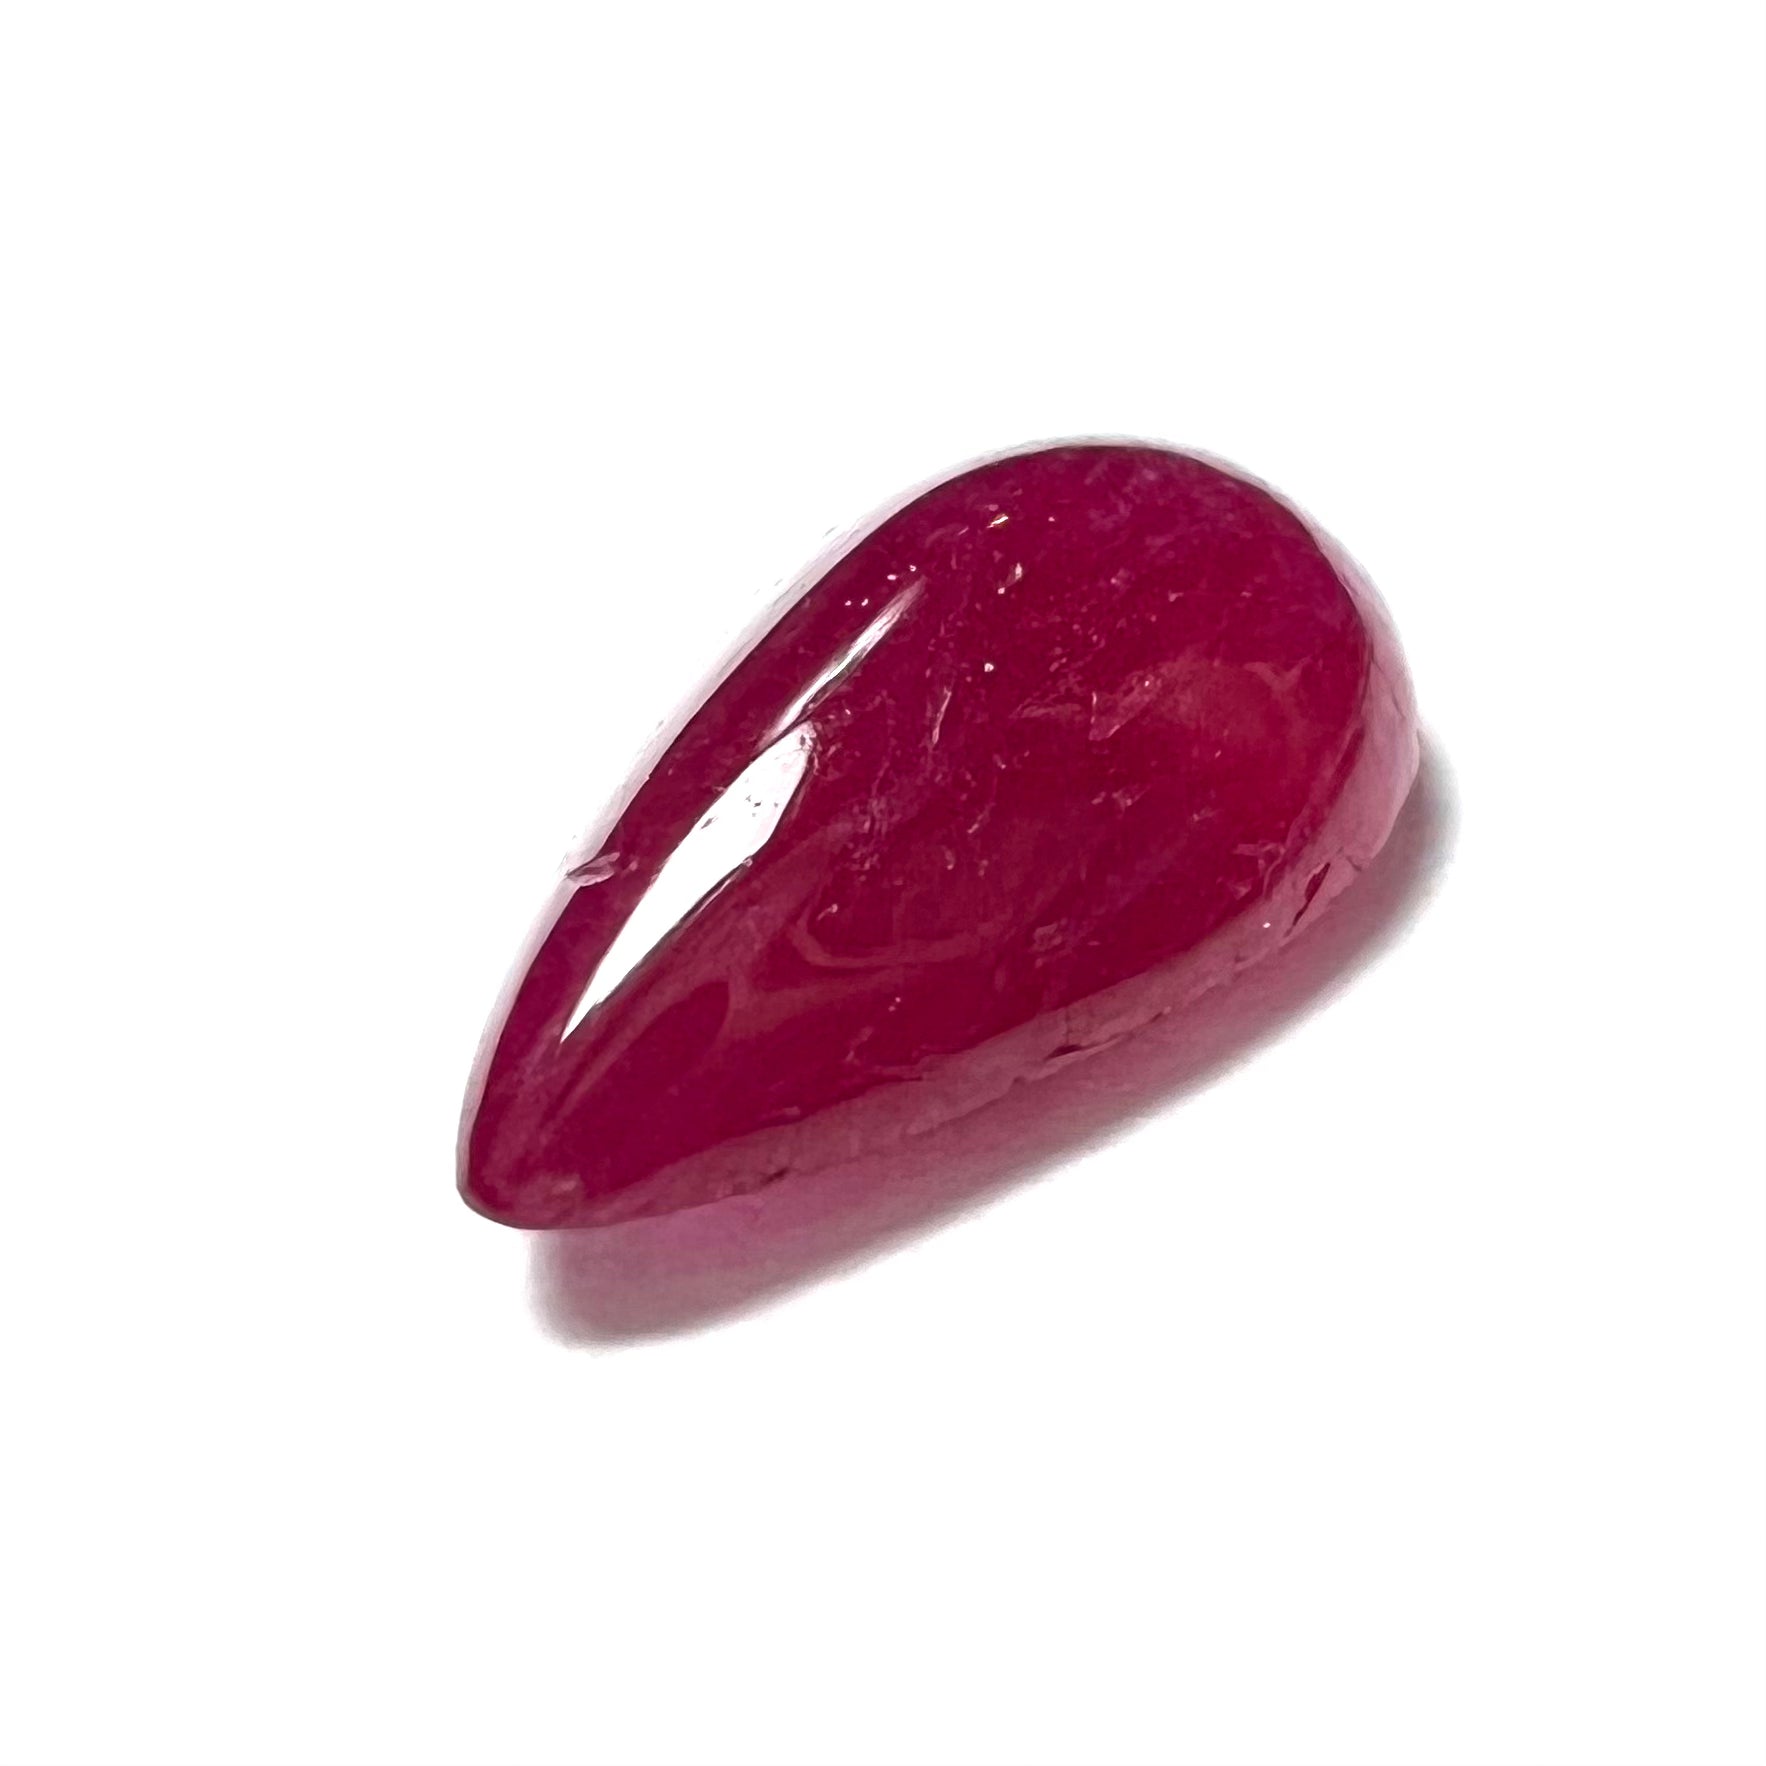 .89CTW Loose Natural Pear Ruby 7.5x4.2x2.2mm Earth mined Gemstone